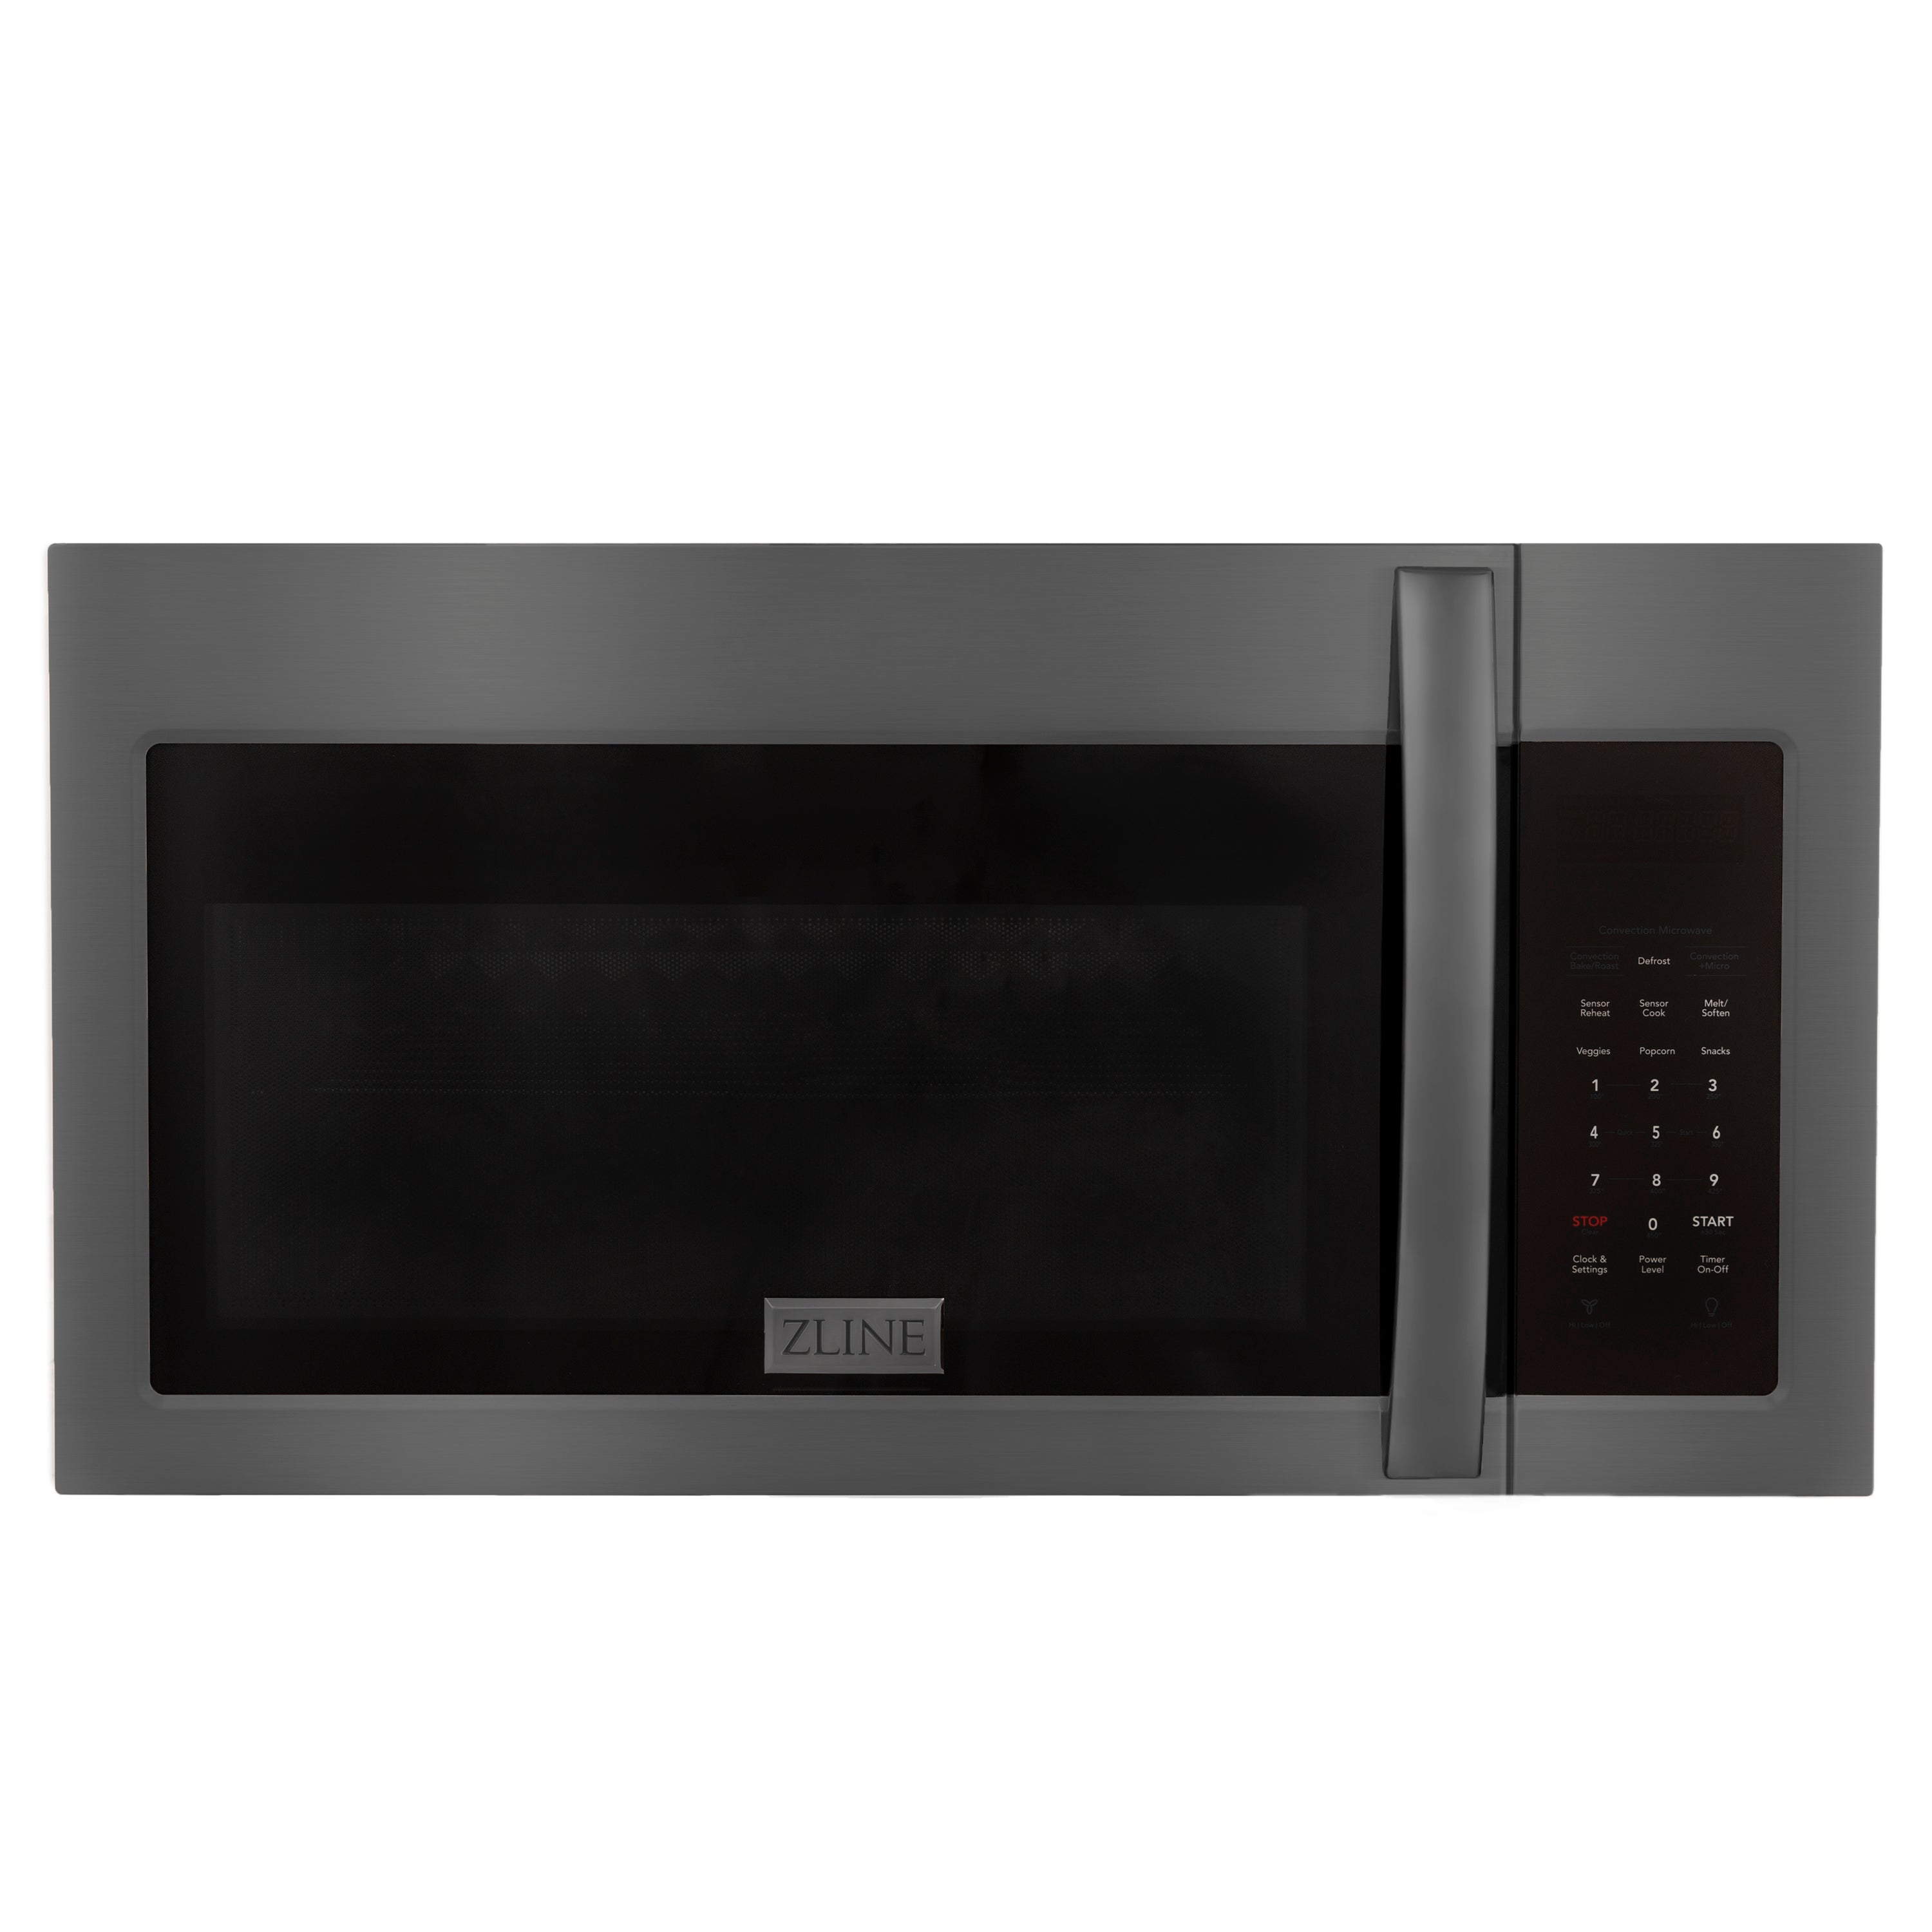 ZLINE 30" 1.5 cu. ft. Over the Range Microwave in Black Stainless Steel with Modern Handle and Set of 2 Charcoal Filters (MMWO-OTRCF-30-BS)